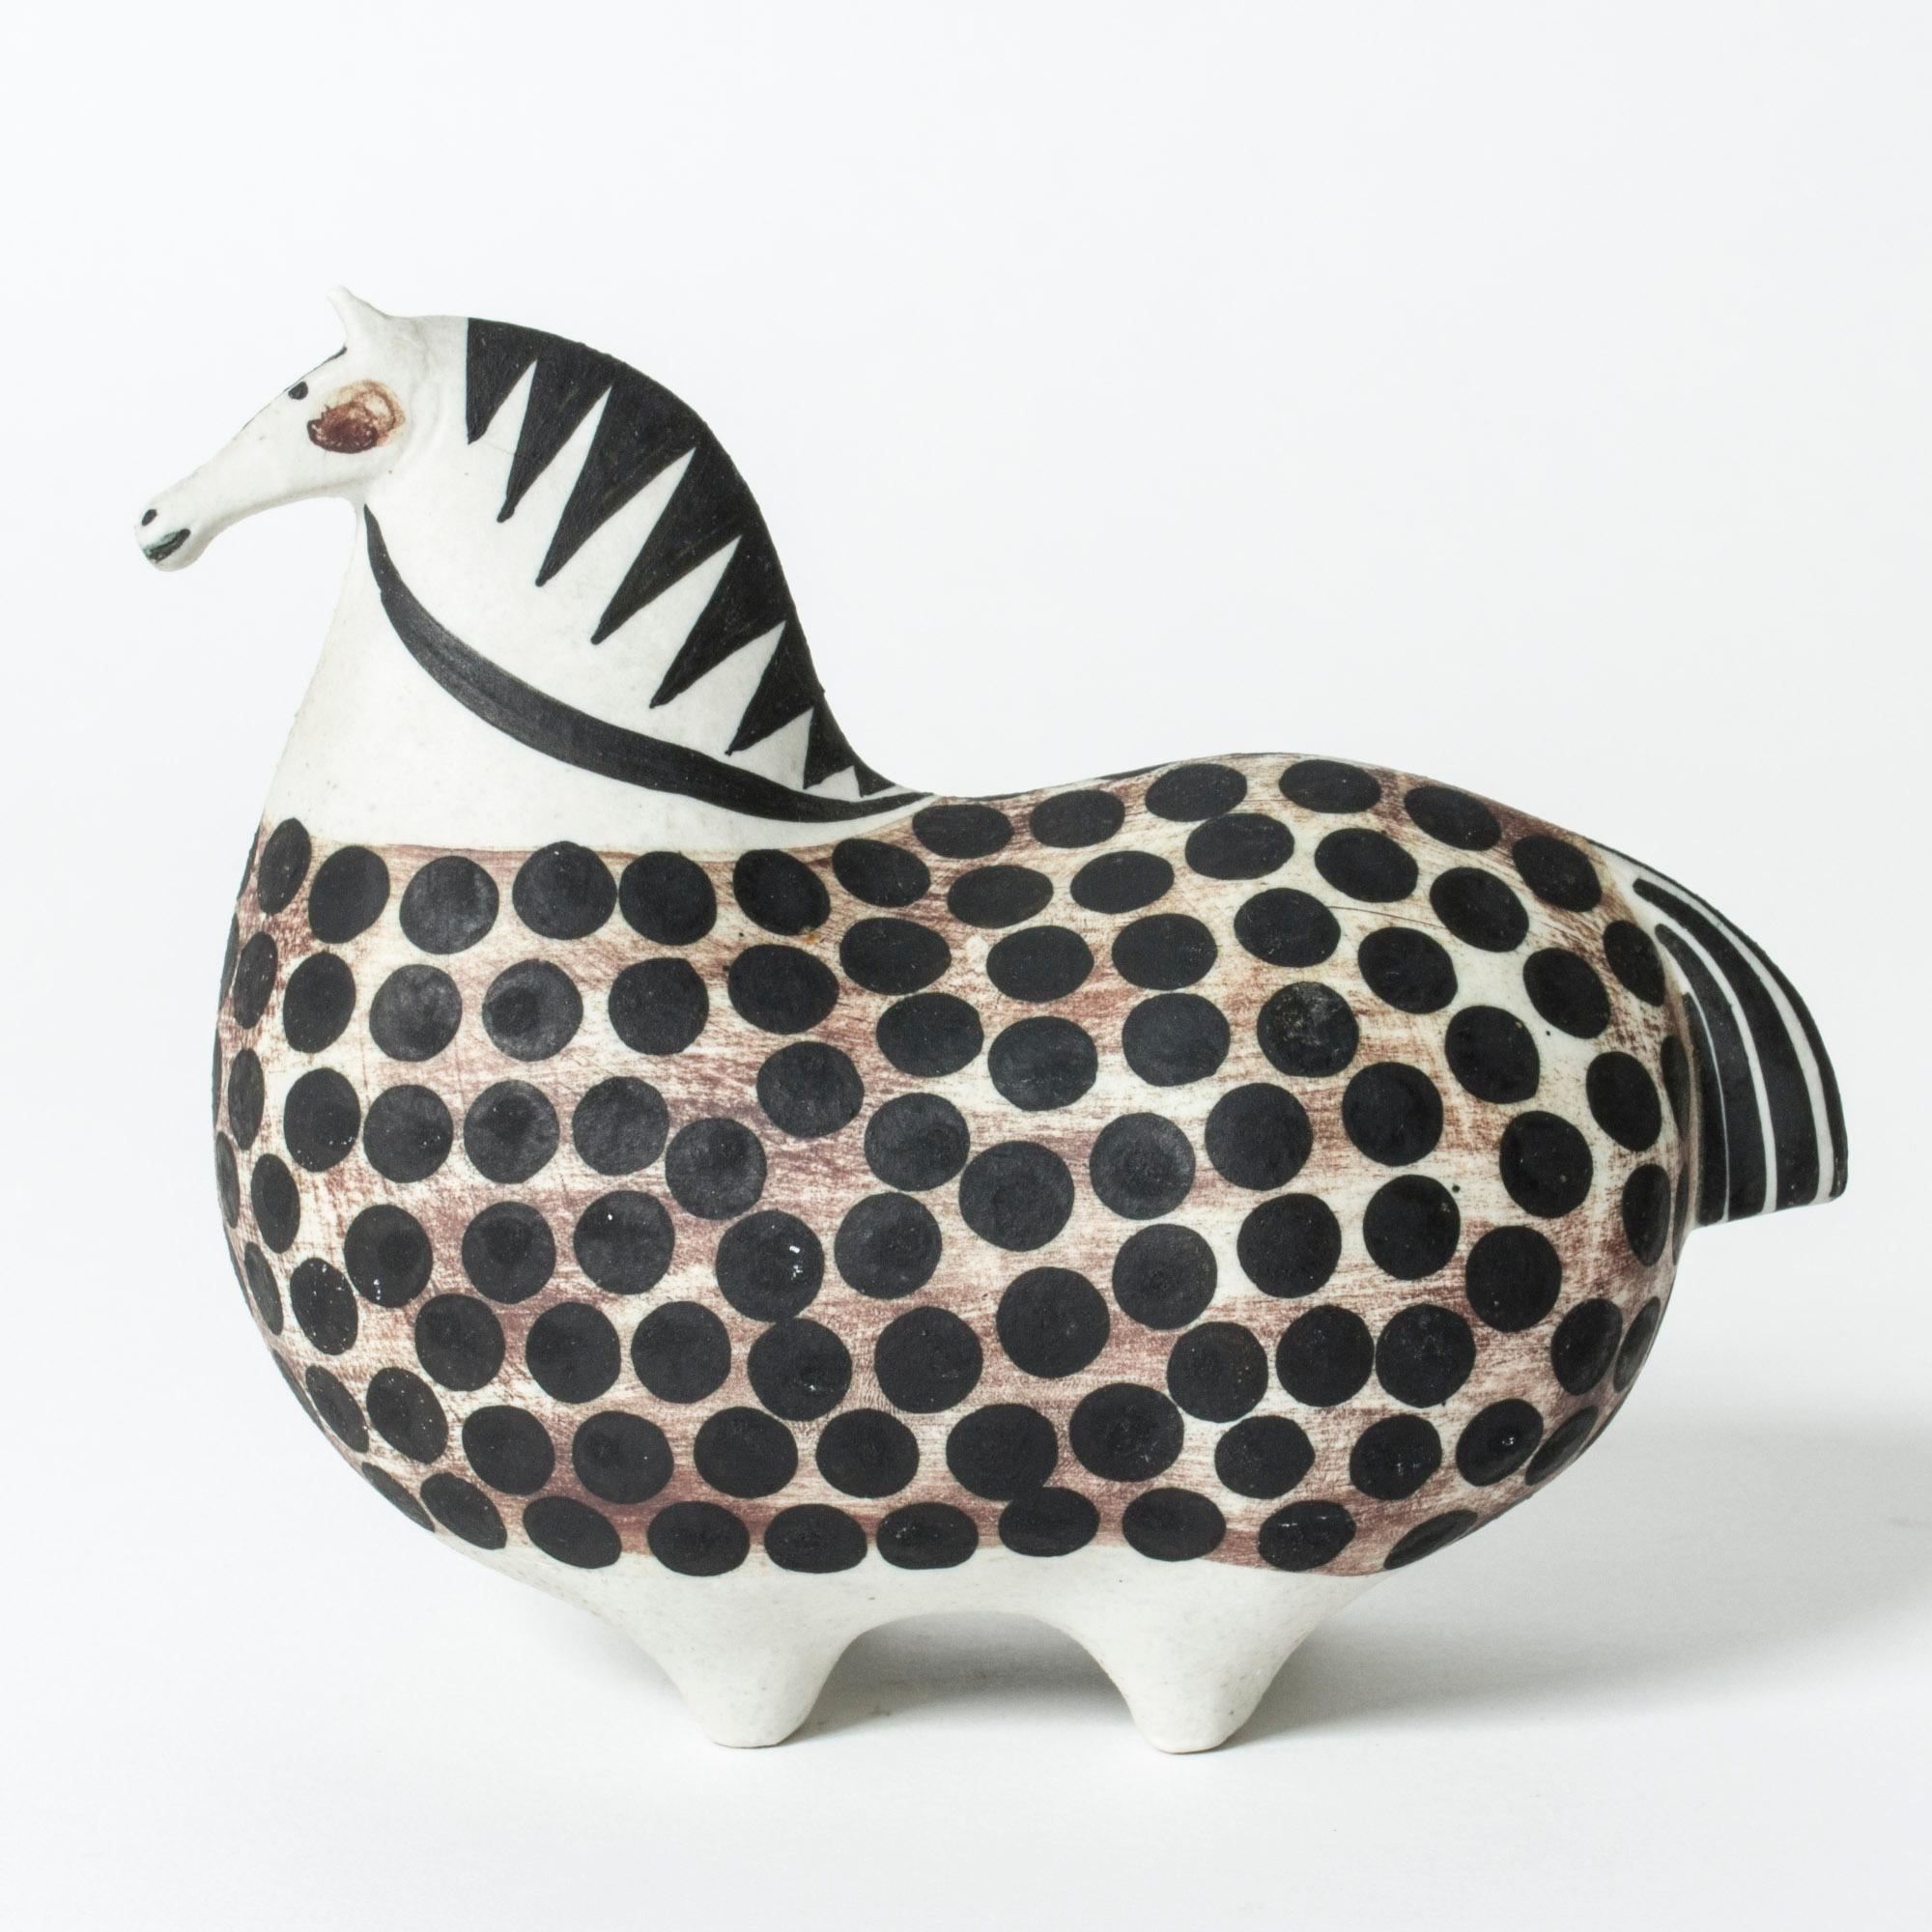 Adorable ceramic horse figurine by Stig Lindberg, called “Springare”, meaning “Steed”. The stylized horse is painted with a brown and polkadot pattern over the body.

The story goes that at the first Studio exhibition of “Springare”, a cavalry